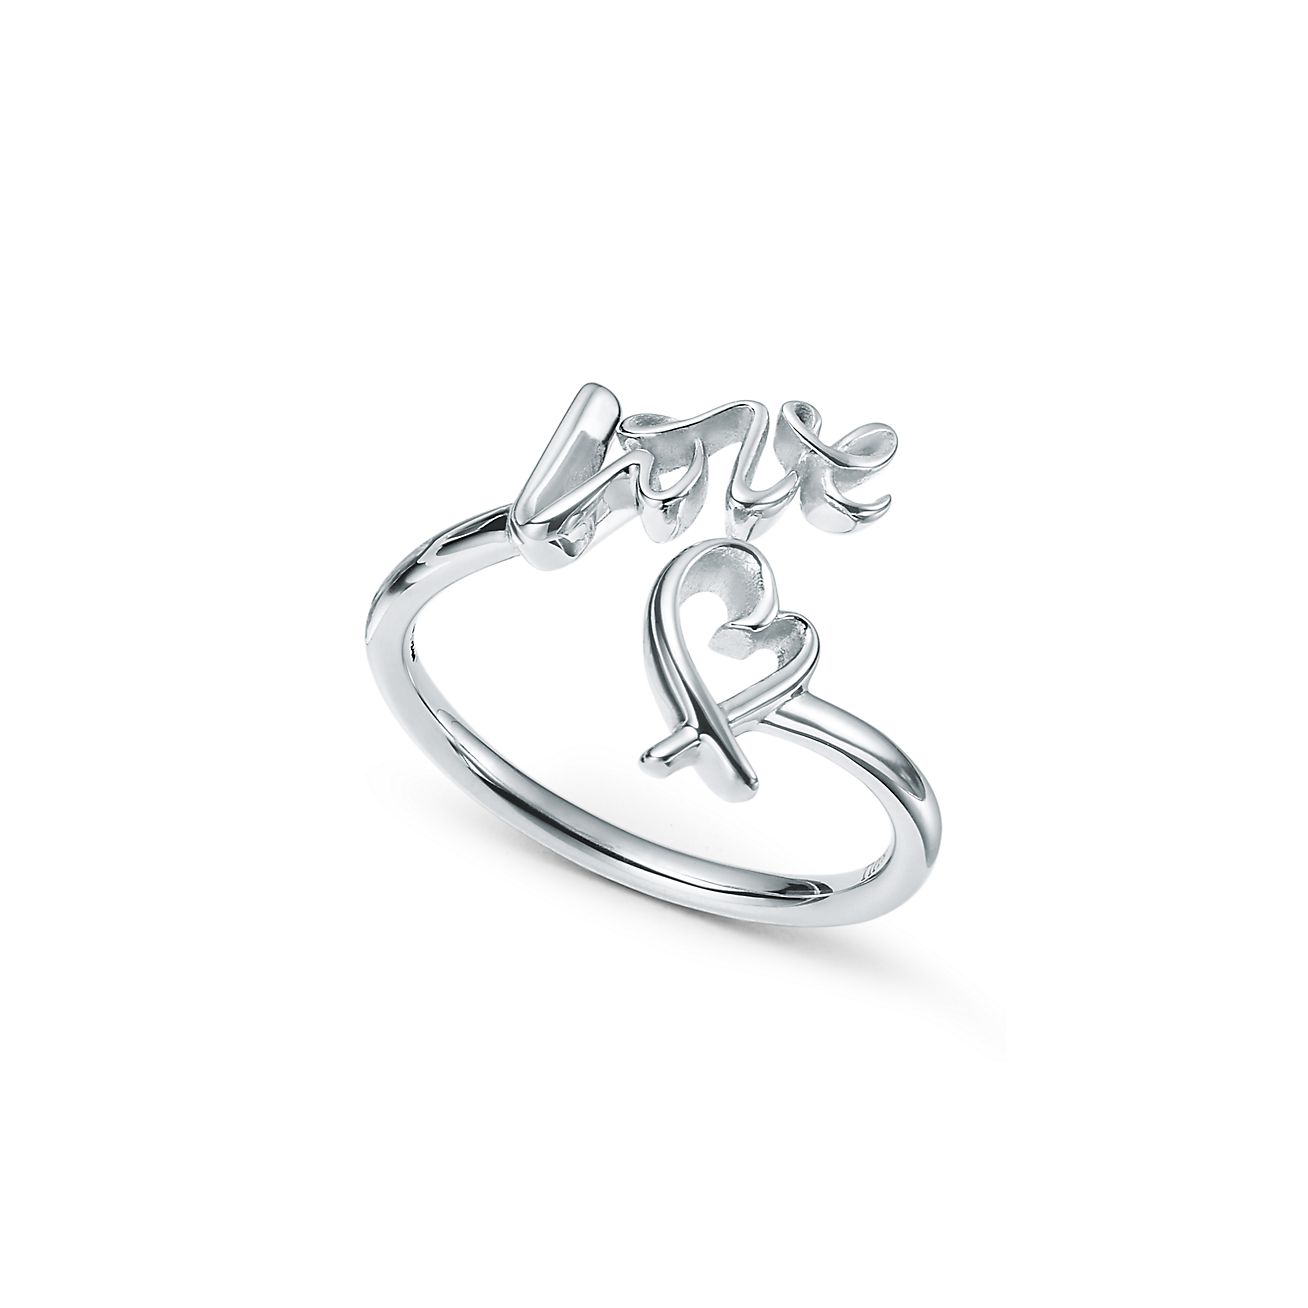 Paloma Picasso® Loving Heart ring in sterling silver. | Tiffany & Co.